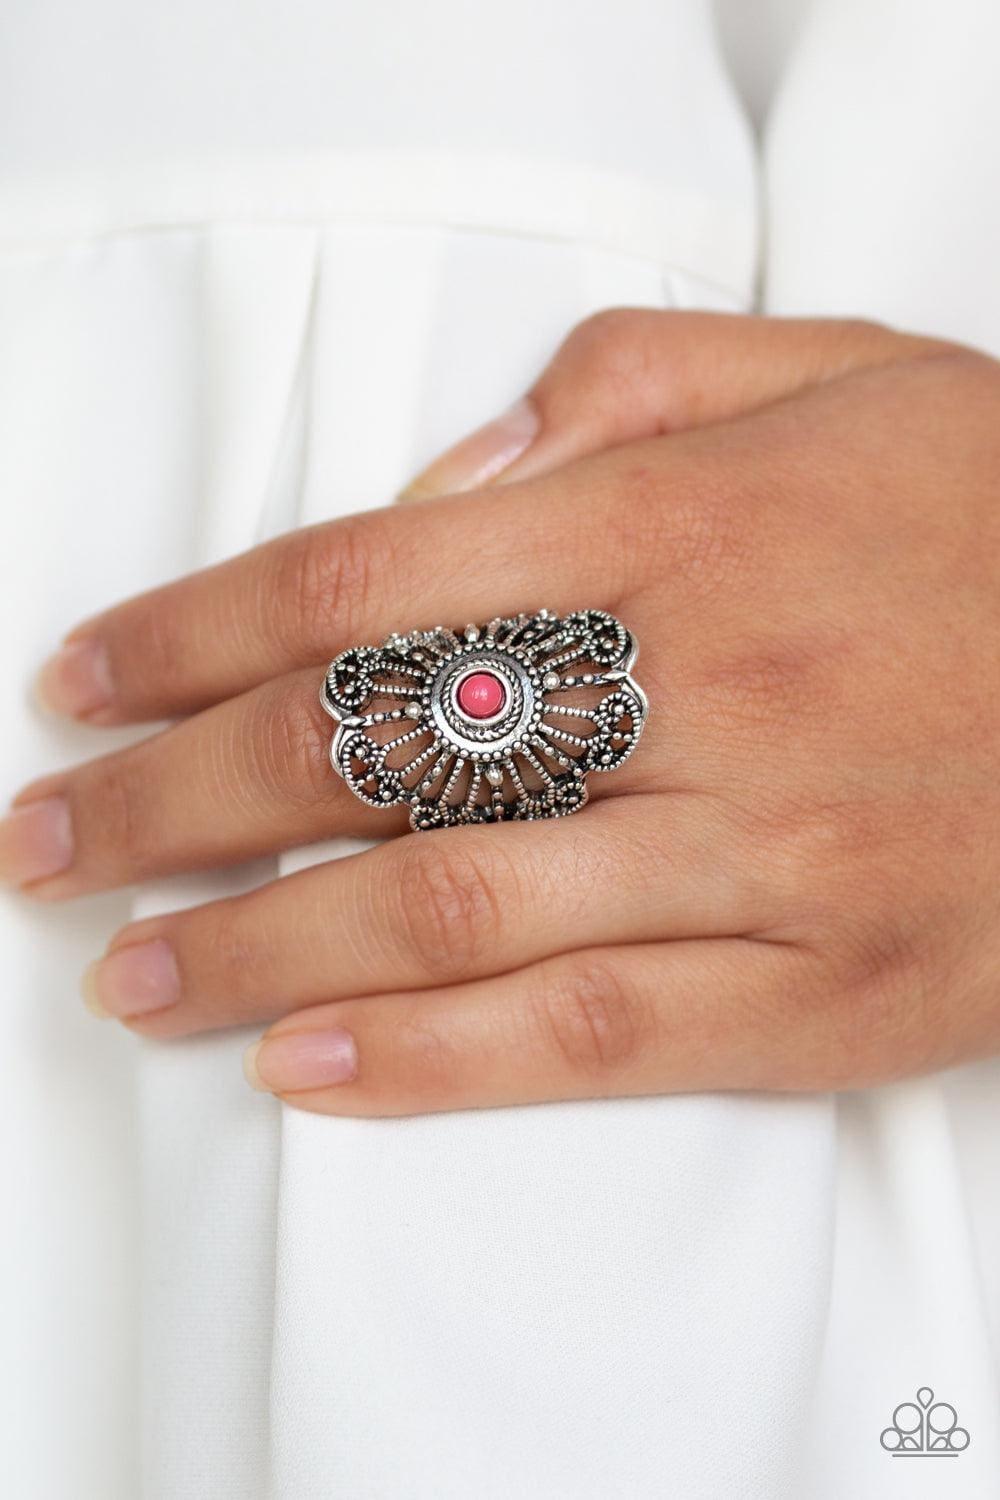 Paparazzi Accessories - Adrift - Pink Ring - Bling by JessieK